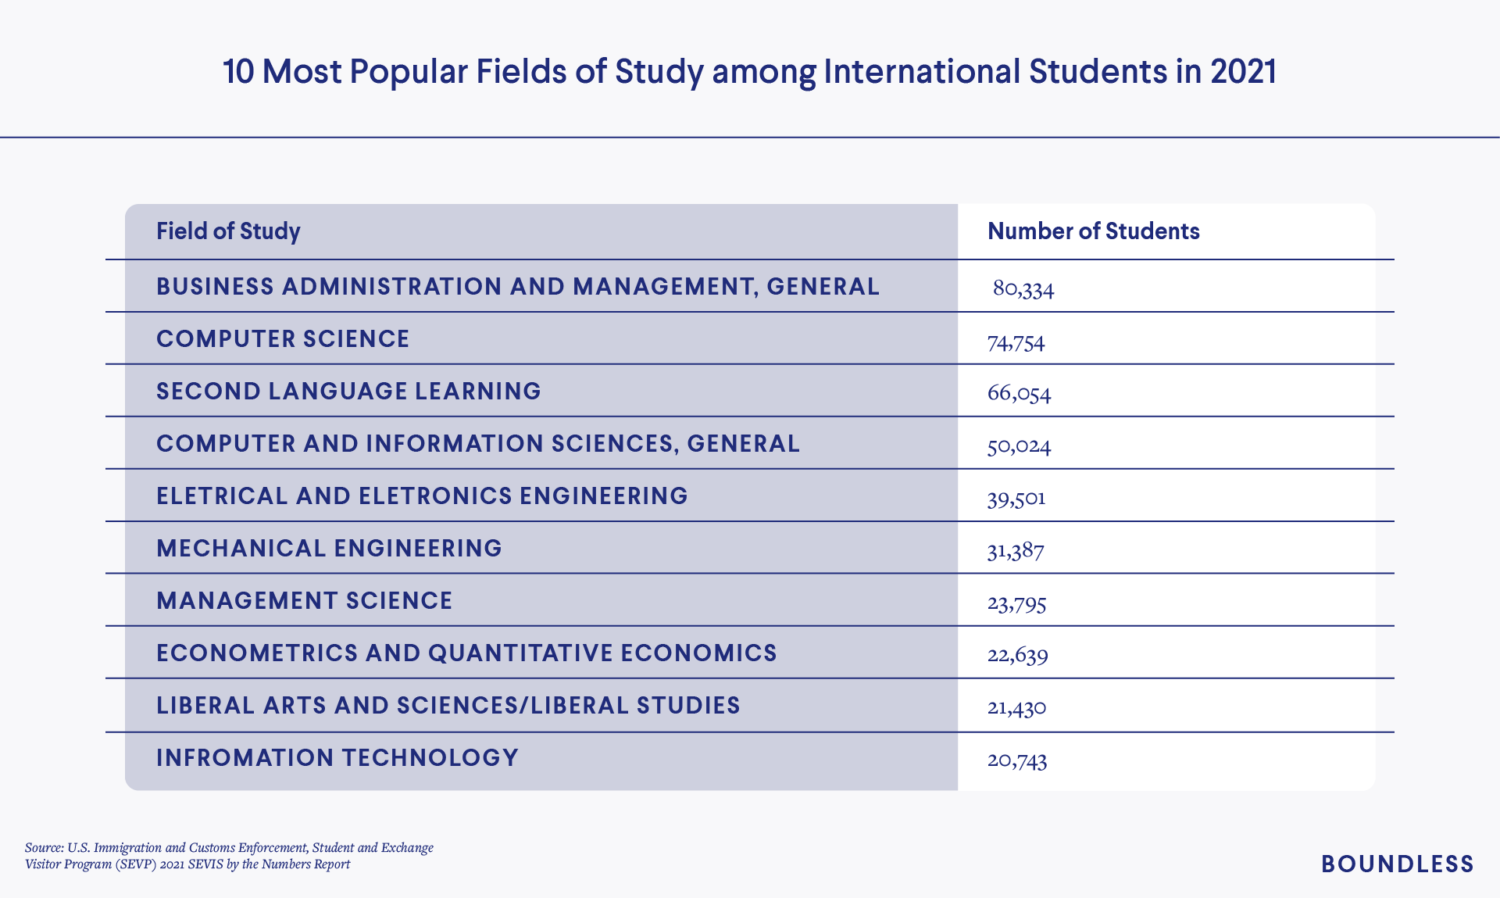 Top 10 fields of study for international students